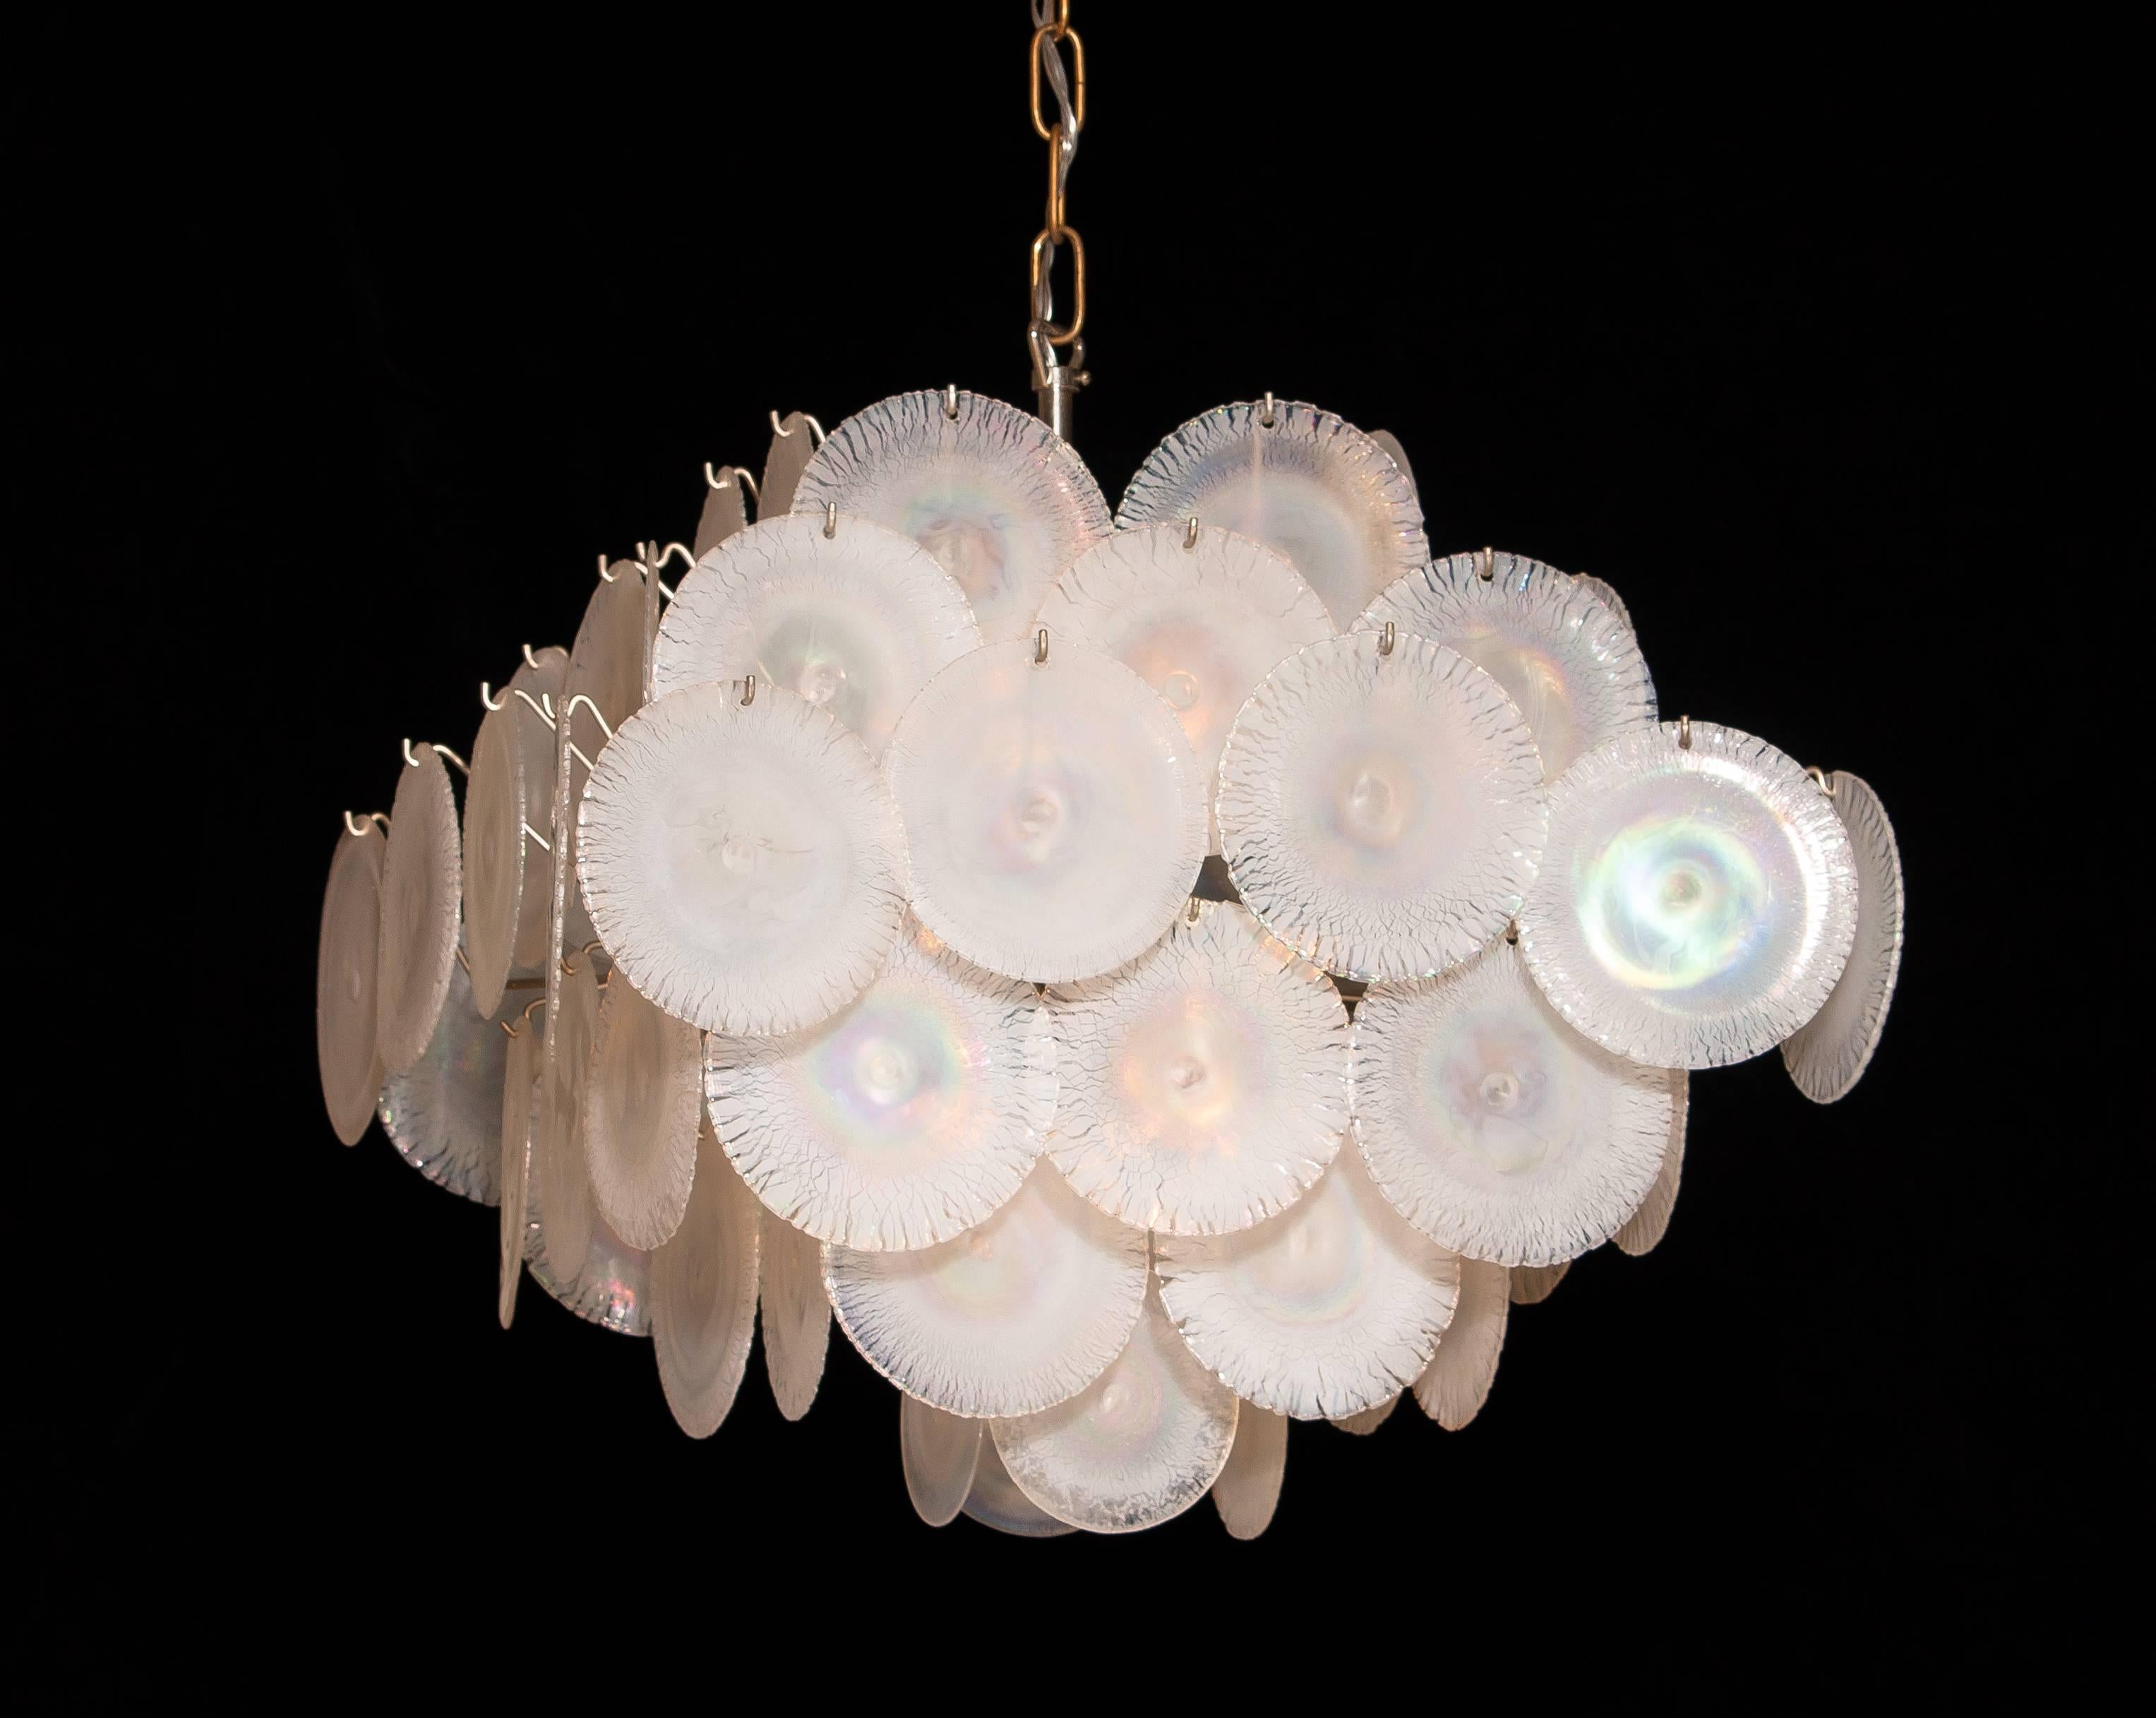 Extremely beautiful Gino Vistosi chandelier with white / pearl colored handmade Murano crystal discs.
This Gino Vistosi chandelier is made in Italy in the 1960s. The chandelier contains 60 Murano white / pearl colored crystal discs.
All in